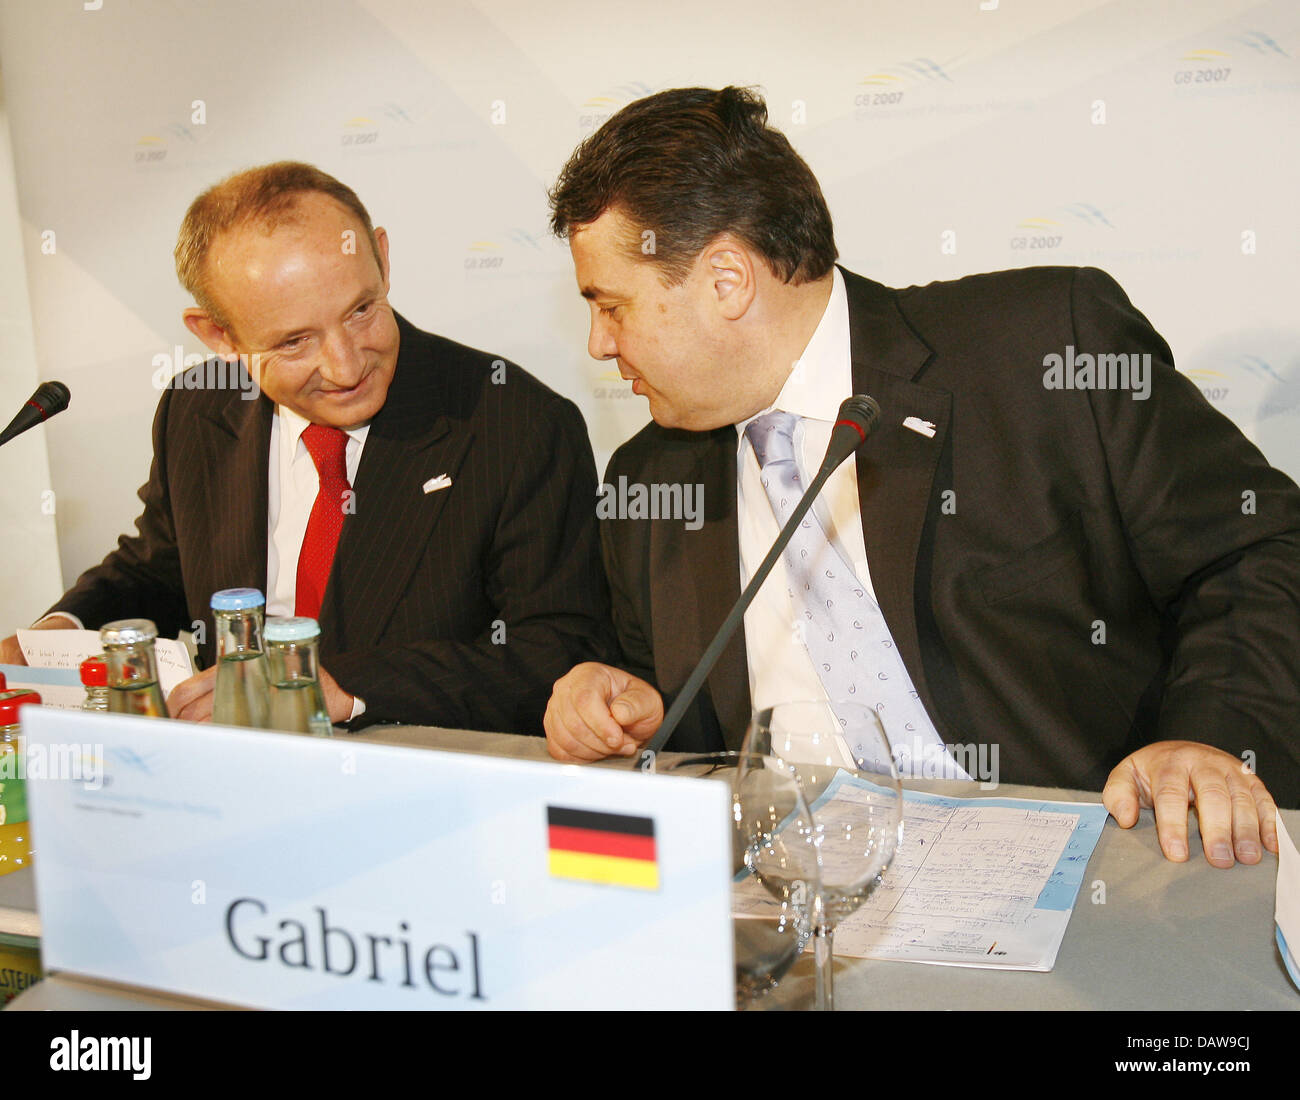 German Minister of Environment Sigmar Gabriel (R) and Yvo de Boer, Executive Secretary of the United Nations Framework Convention on Climate Change (UNFCCC), chat during the concluding press conference of the meeting of environment ministers of the G8 countries and five threshold countries at Castle Cecilienhofin Potsdam, Germany, Saturday 17 March 2007. The politicians discussed a Stock Photo